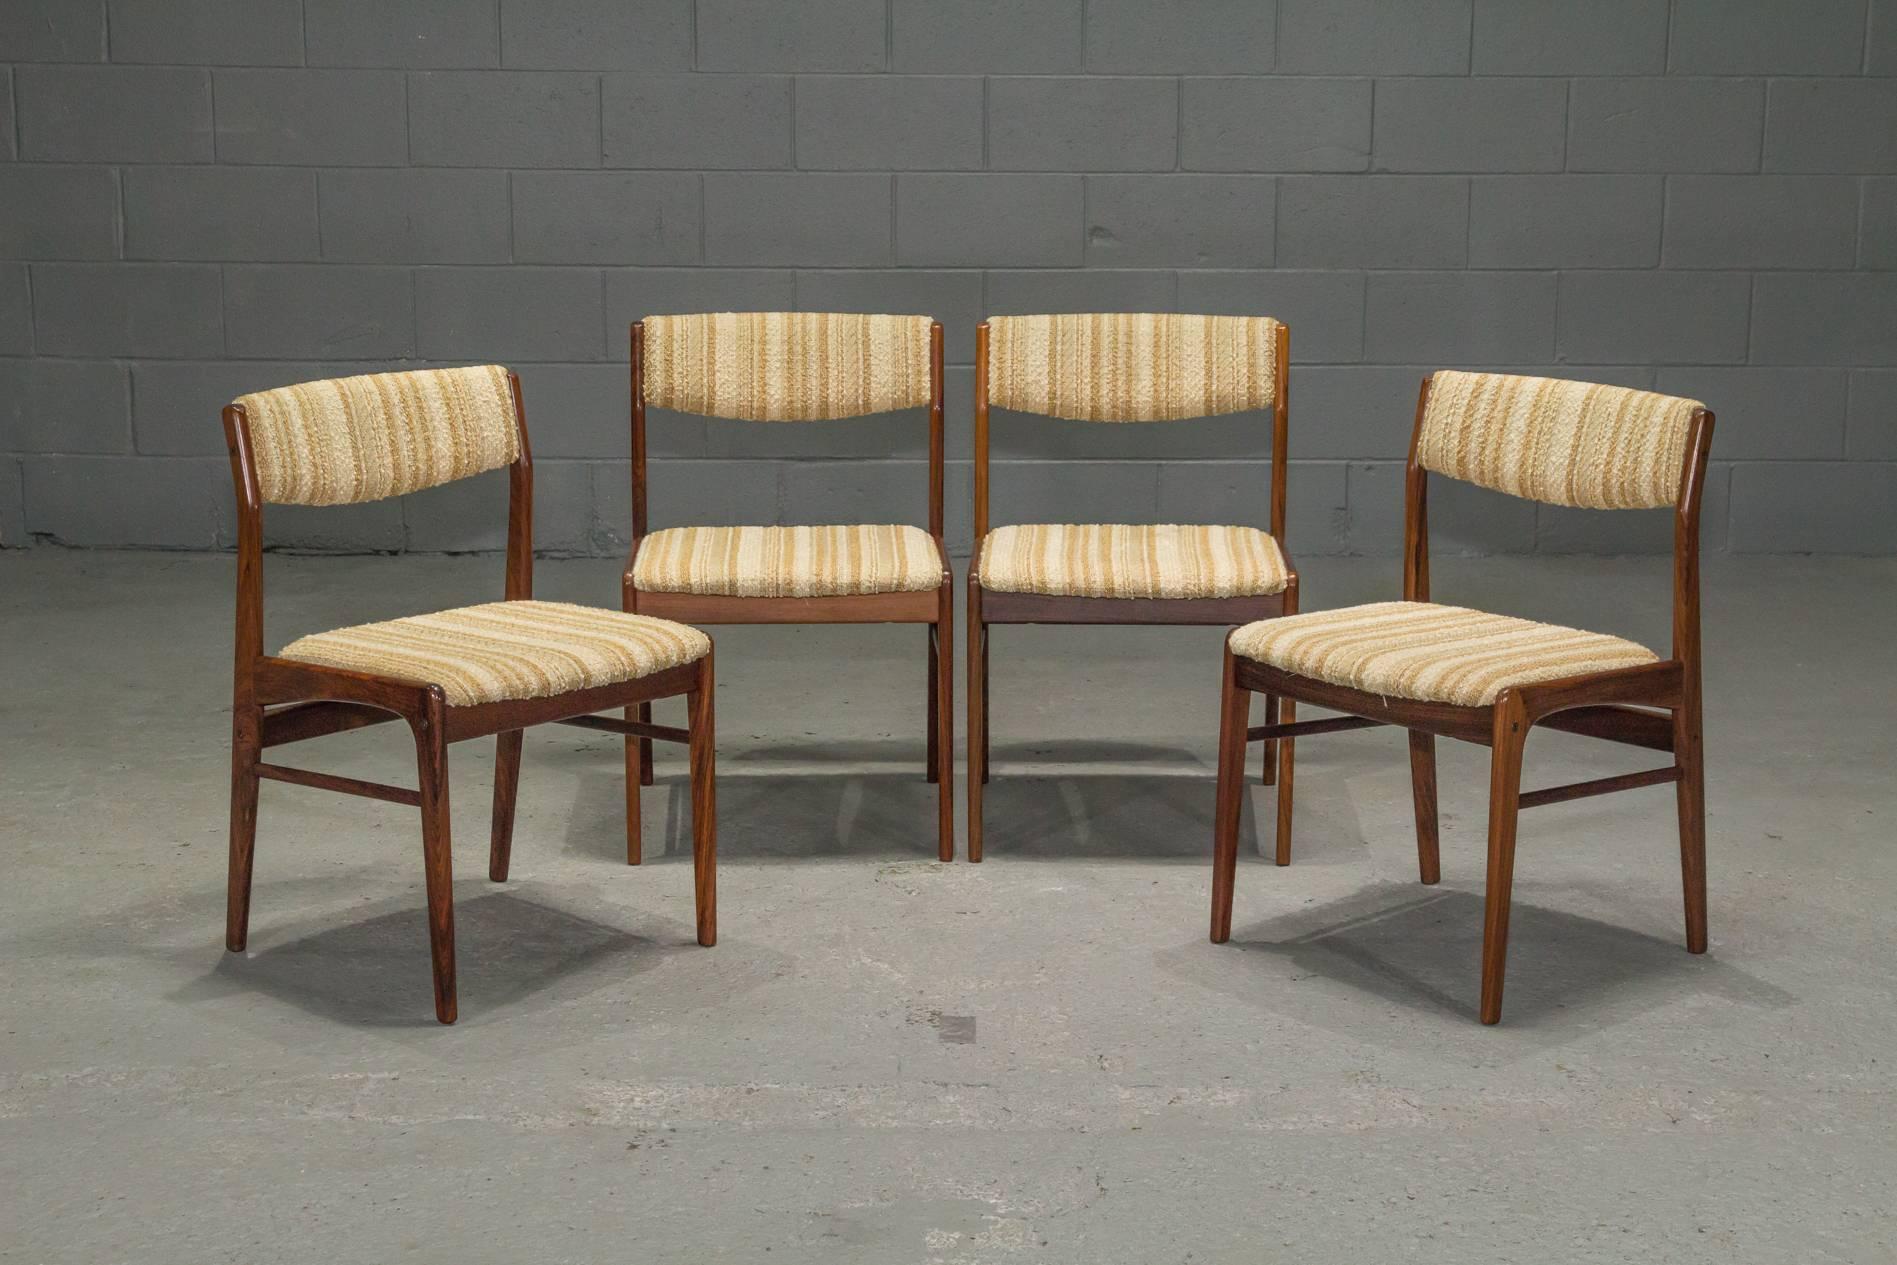 Set of 4 Danish Modern Rosewood Dining Chairs by Thorso Stole. Beautifully detailed joinery. Original textile in good condition but ready to reupholster in the fabric of your choice. 